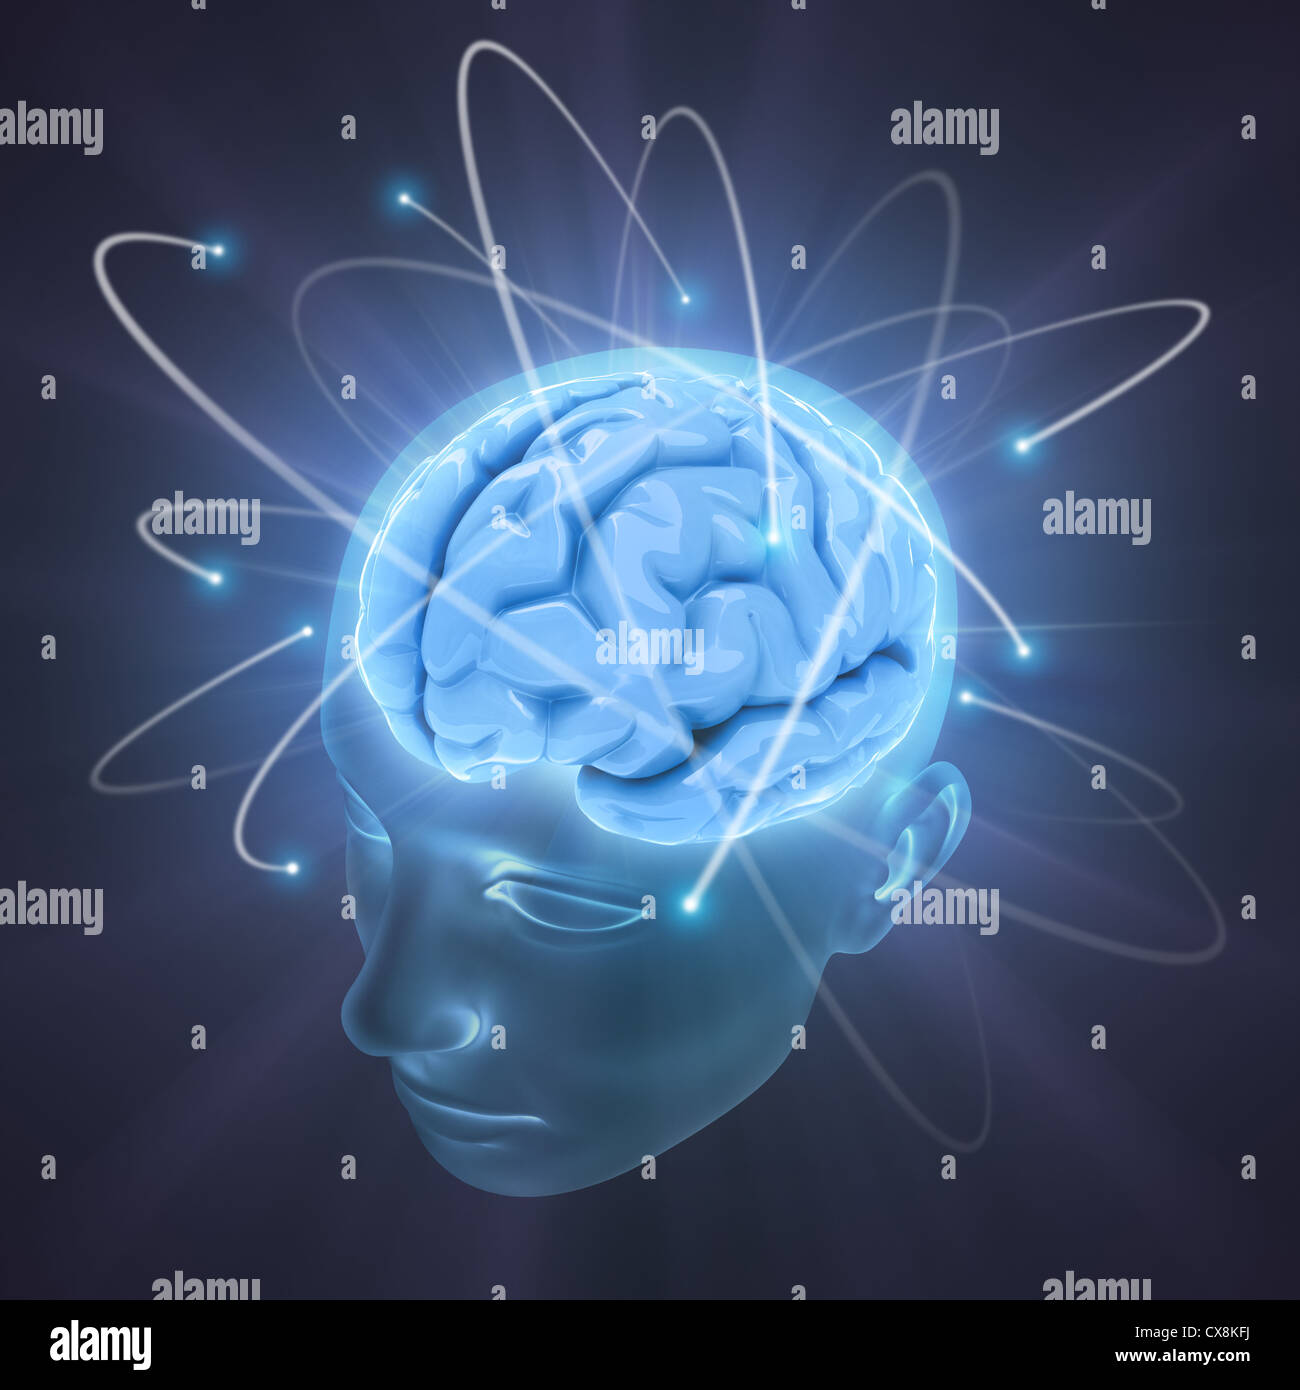 Head illuminated by the energy of the brain. Concept of thinking, the power of mind. Stock Photo